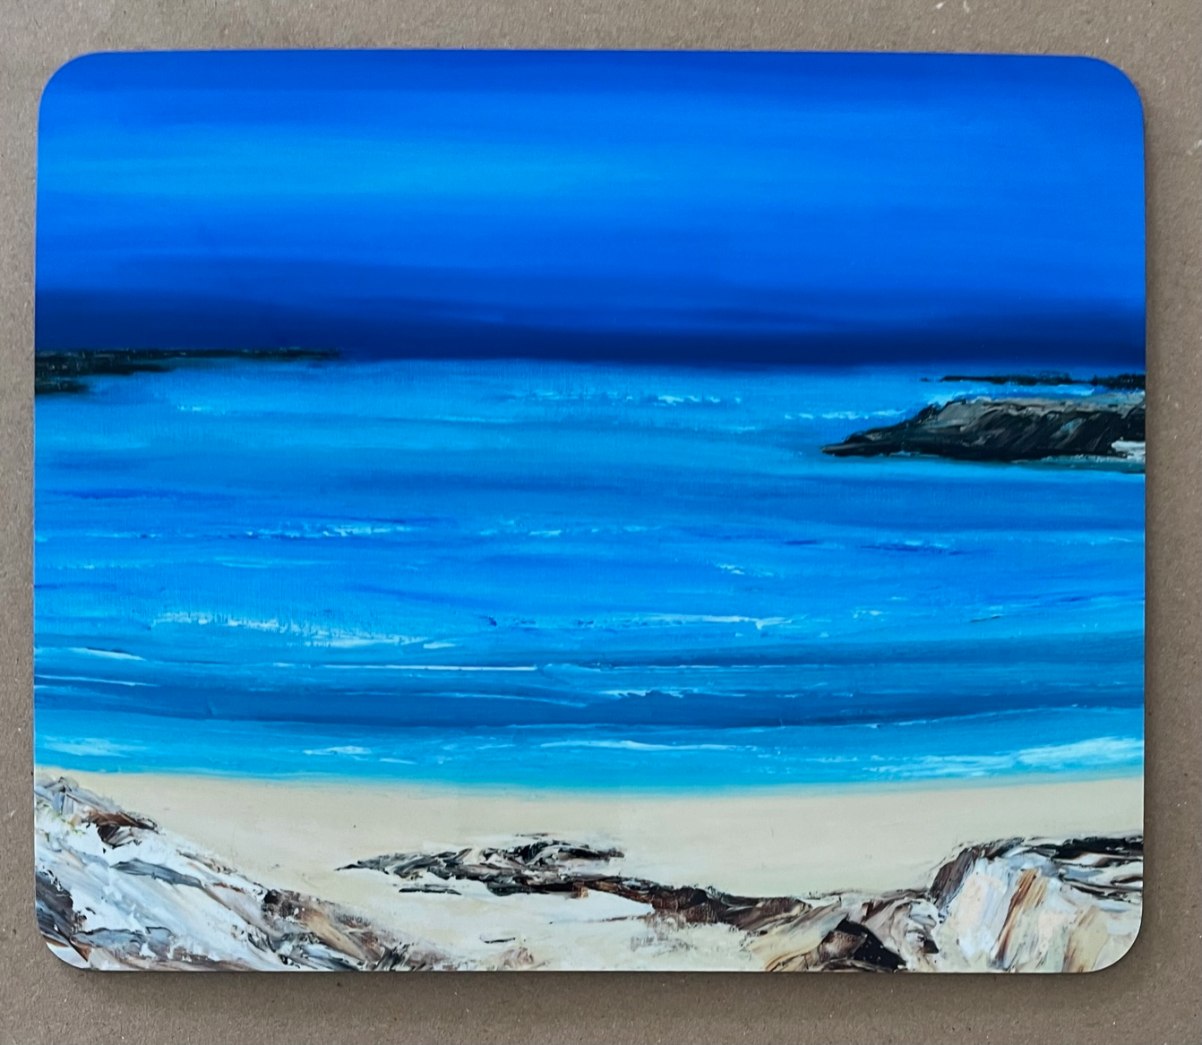 Placemat with a Hebridean seascape painting.